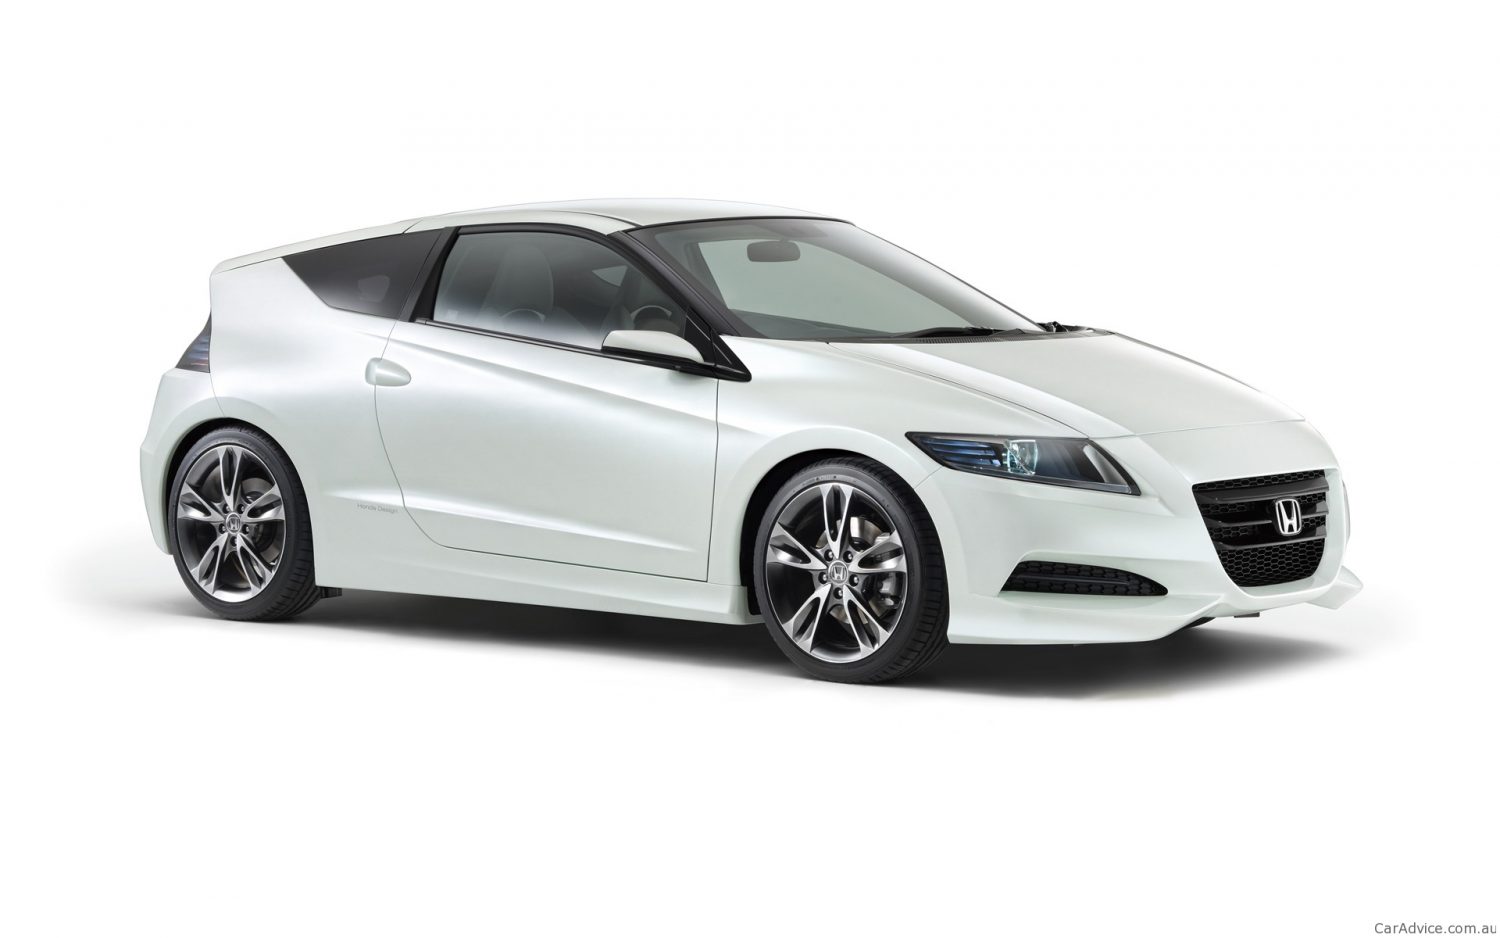 New Honda CR-Z Offers Sport Cool and Hybrid MPG at a Low Price